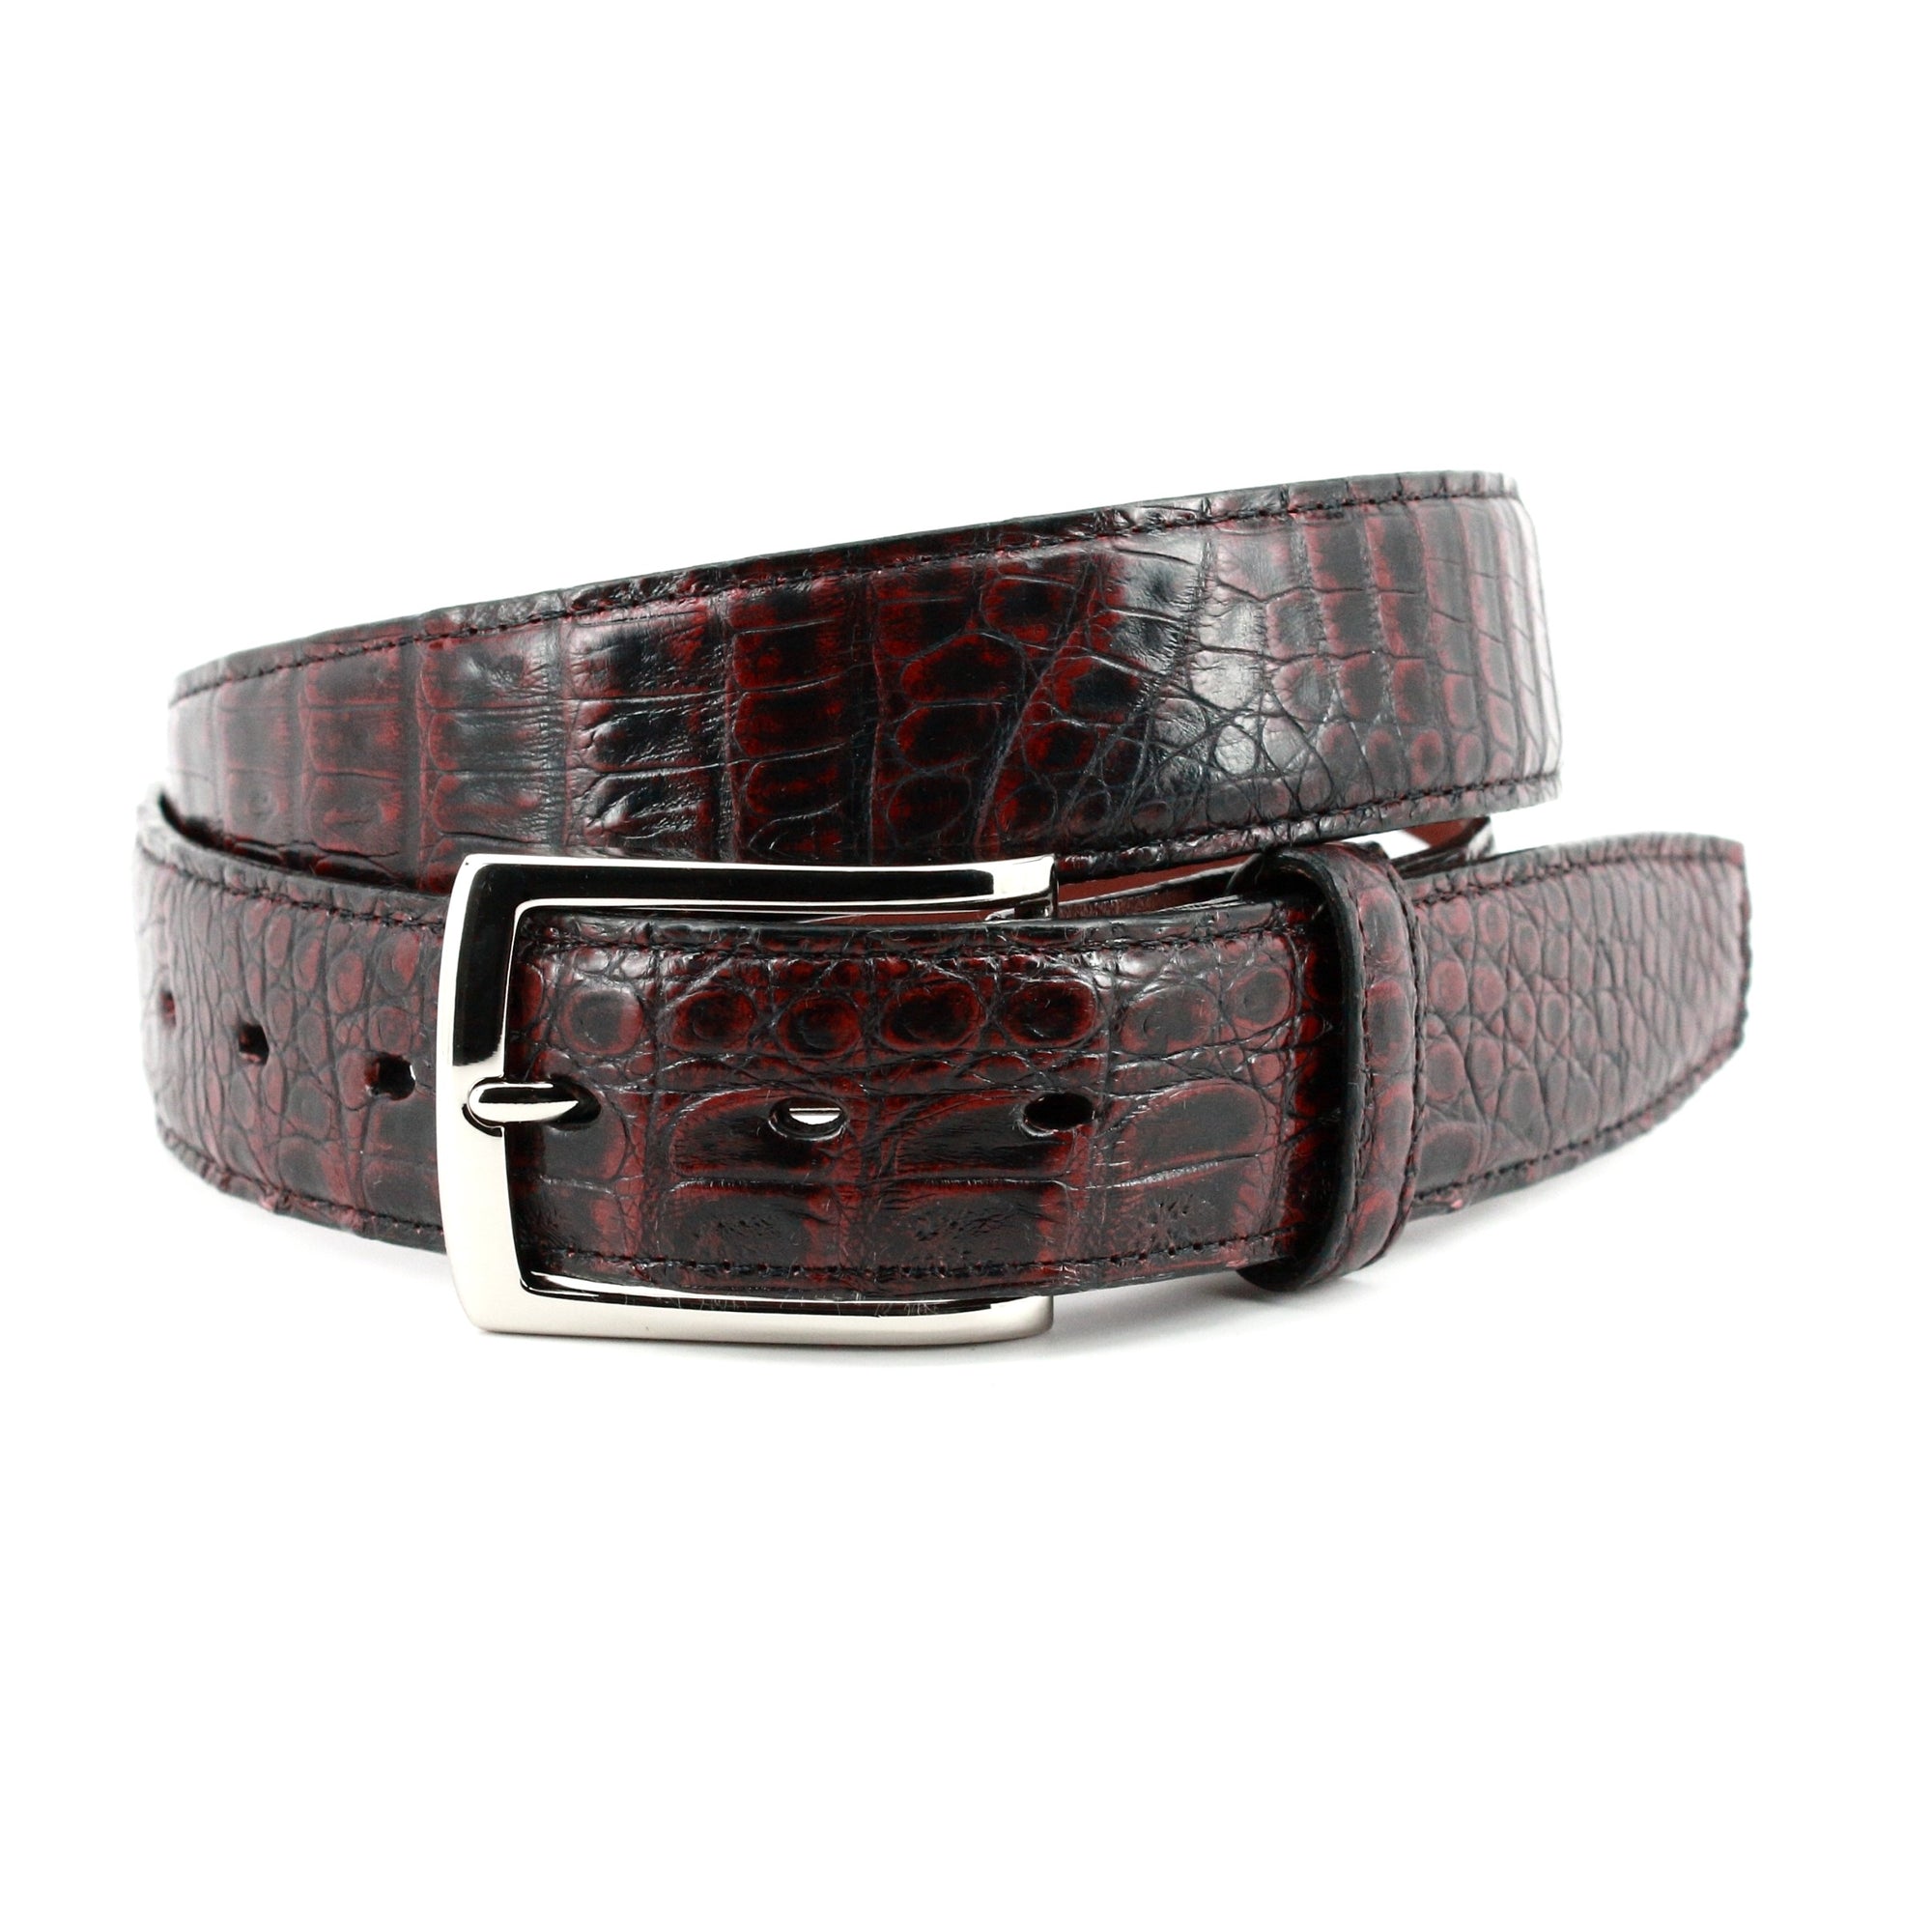 South American Caiman Belt in Black Cherry by Torino Leather